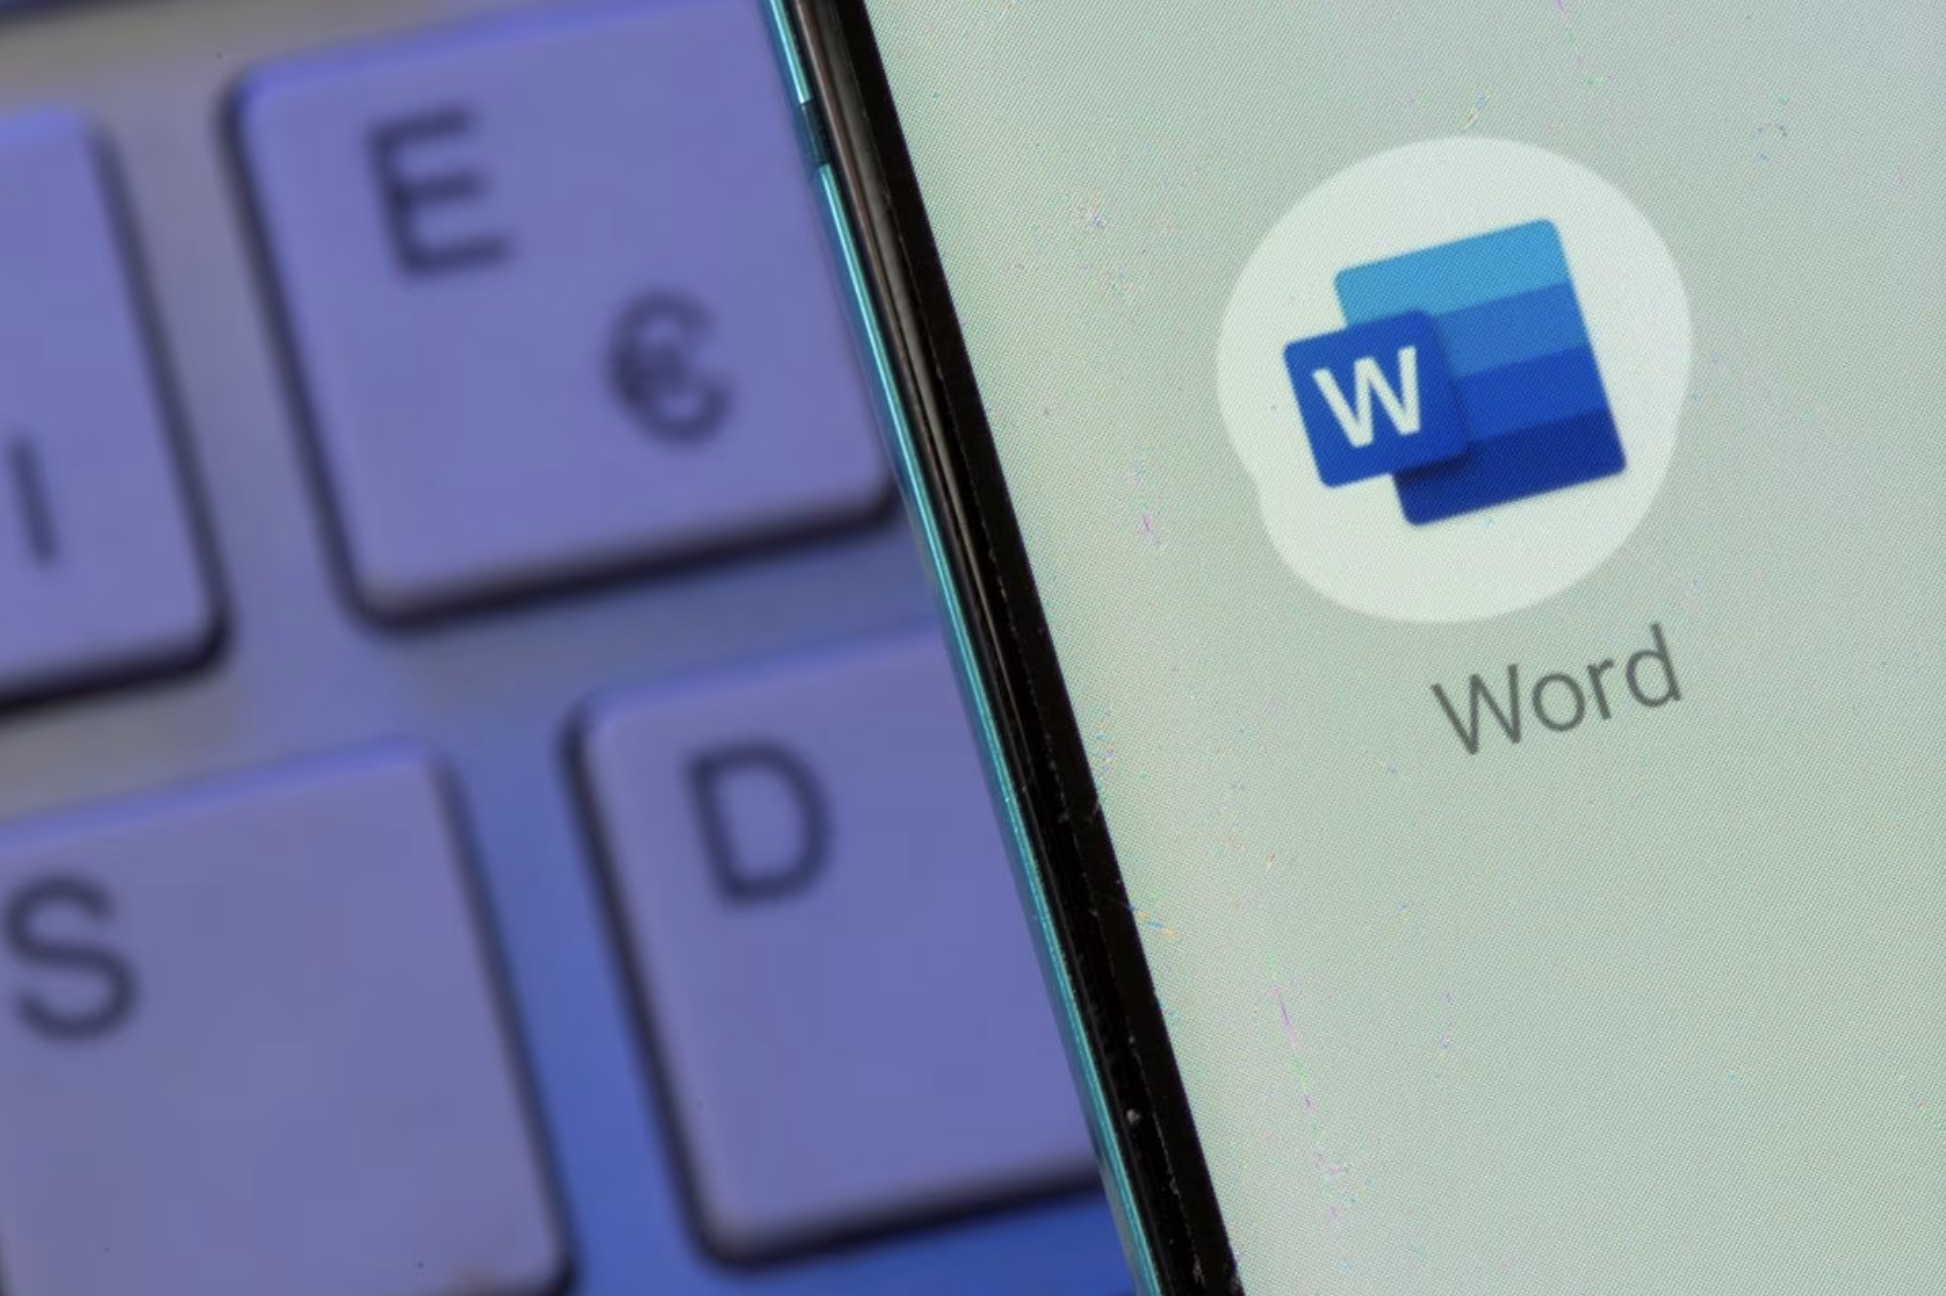 An image of the Microsoft Word app seen on a smartphone, July 26, 2021. /Reuters